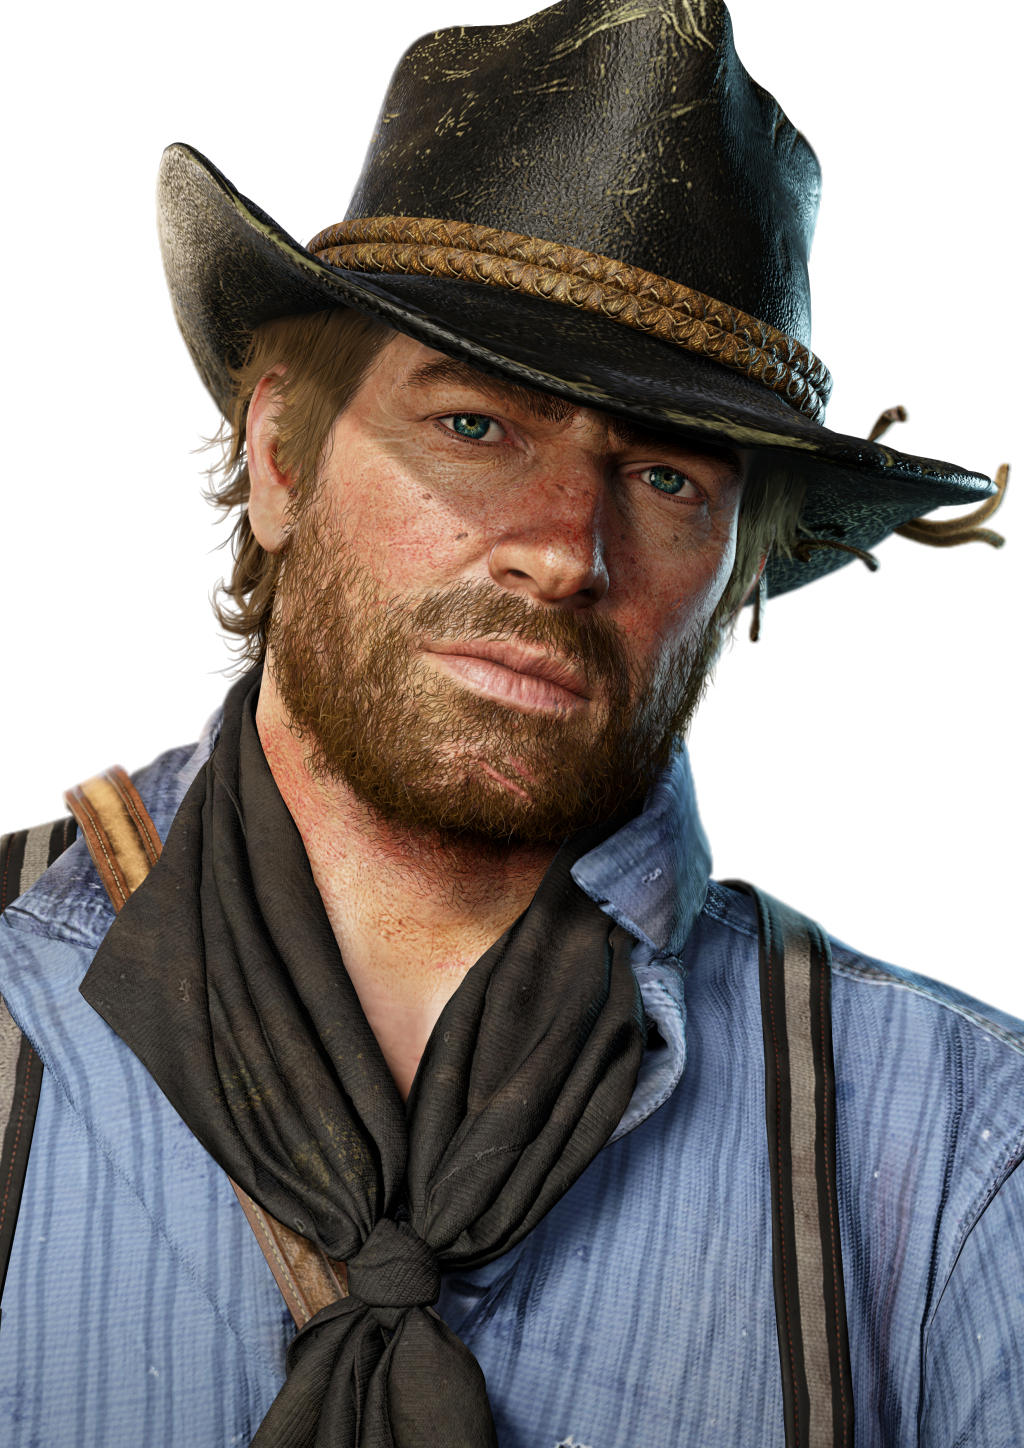 Arthur Morgan screenshots, images and pictures - Giant Bomb